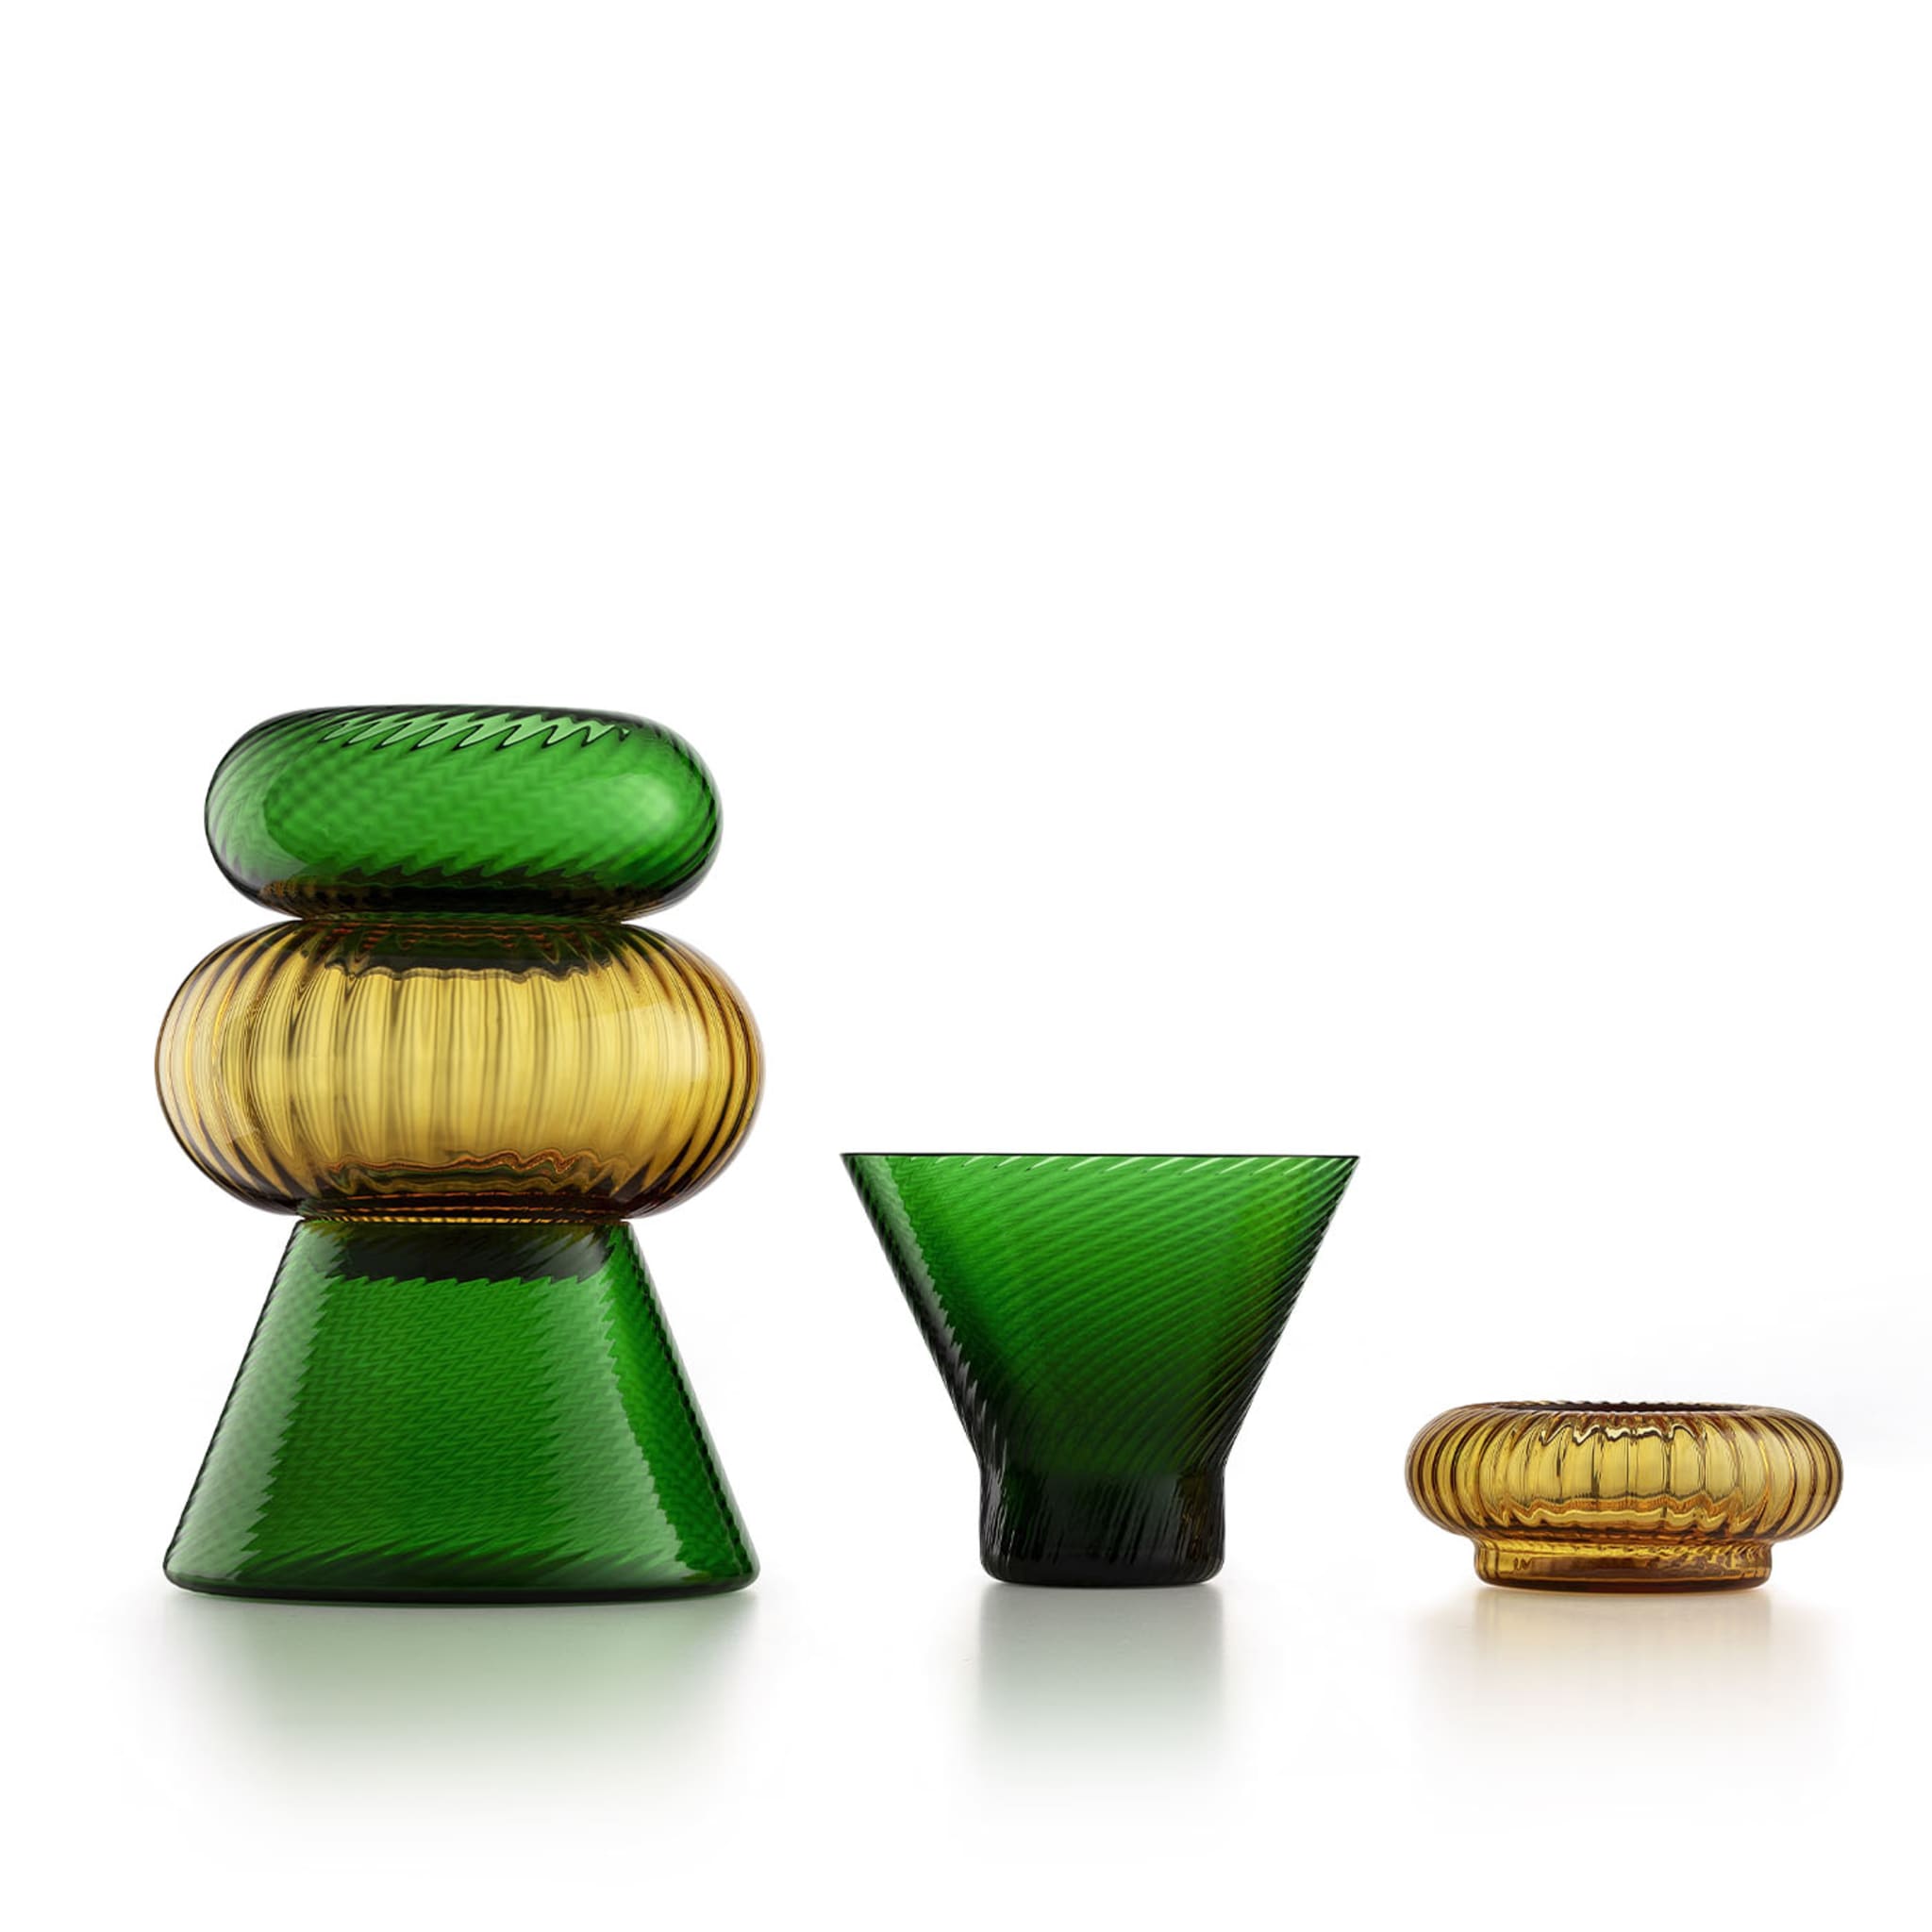 Issey Set of 5 Green and Amber Vases By Matteo Zorzenoni - Alternative view 2